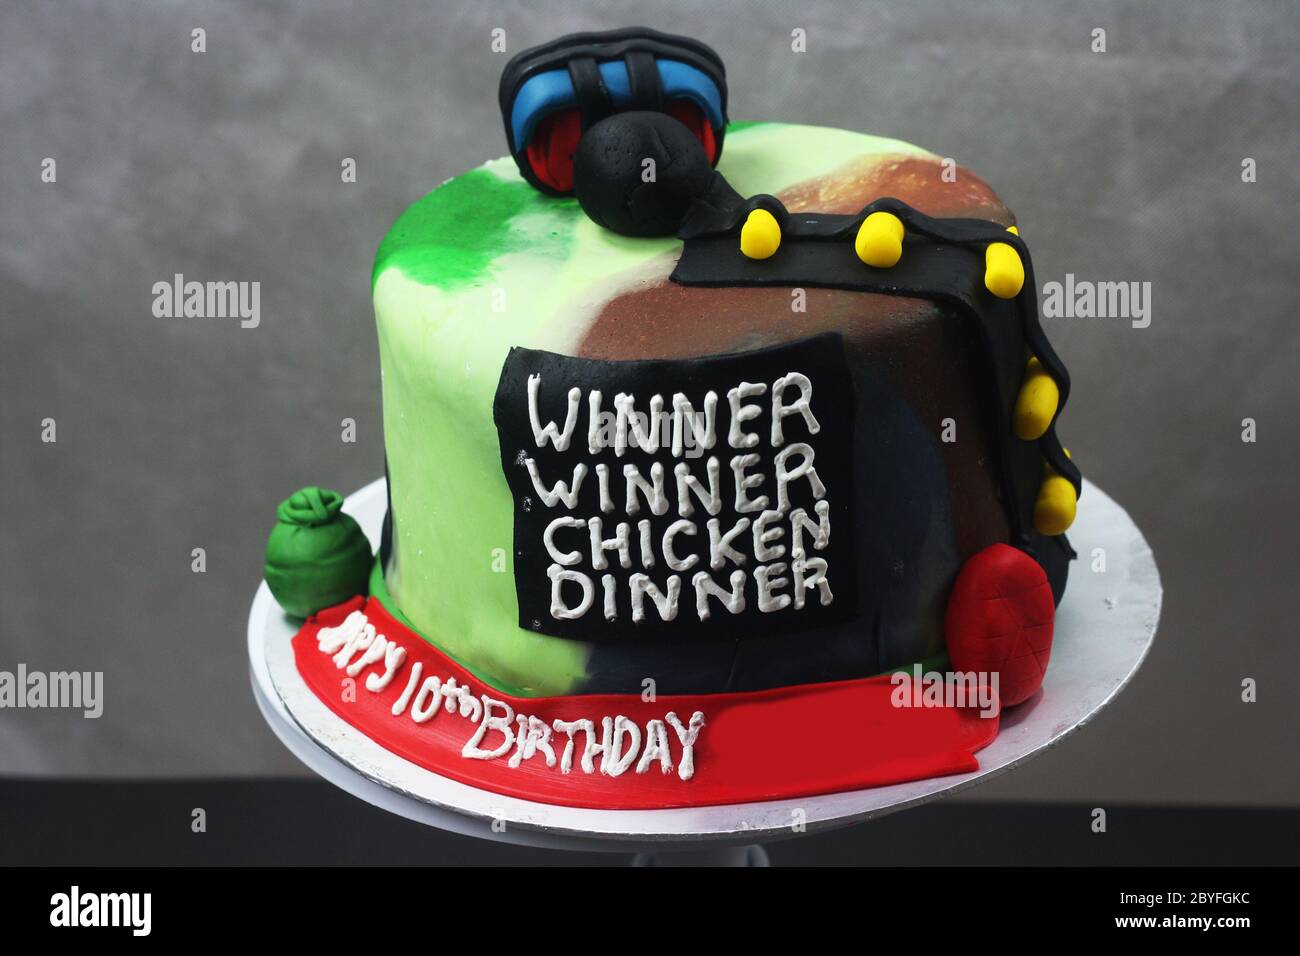 Sabah, Malaysia - 10 March 2020 : PUBG gamer inspired cake isolated with dark background. Stock Photo